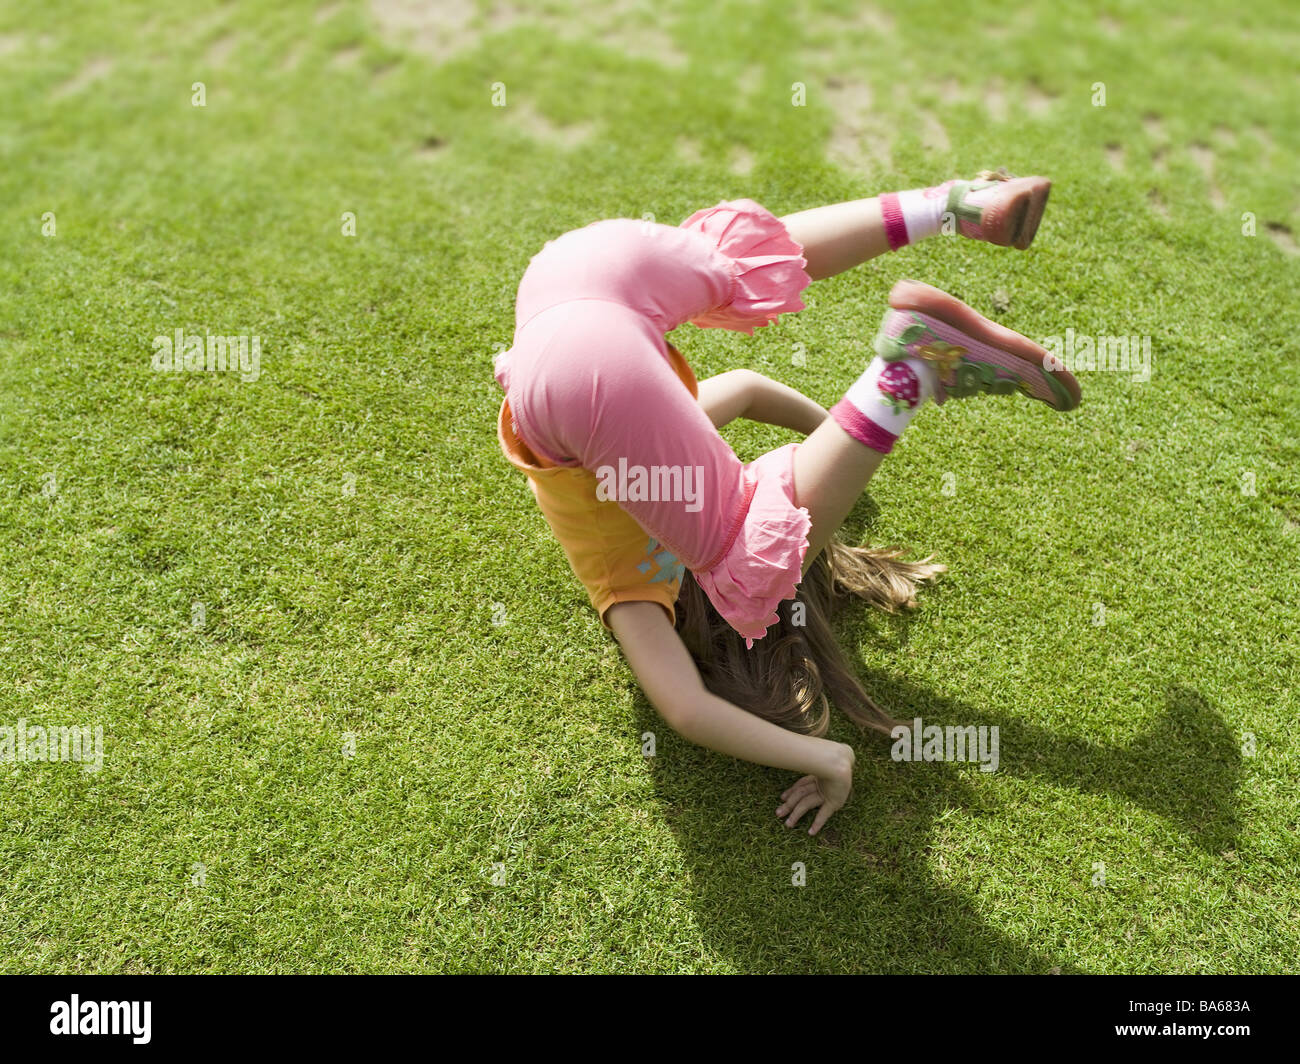 Meadow girls somersault movement series people child 6 years garden activity role does fun pleasantry enjoyments childhood Stock Photo